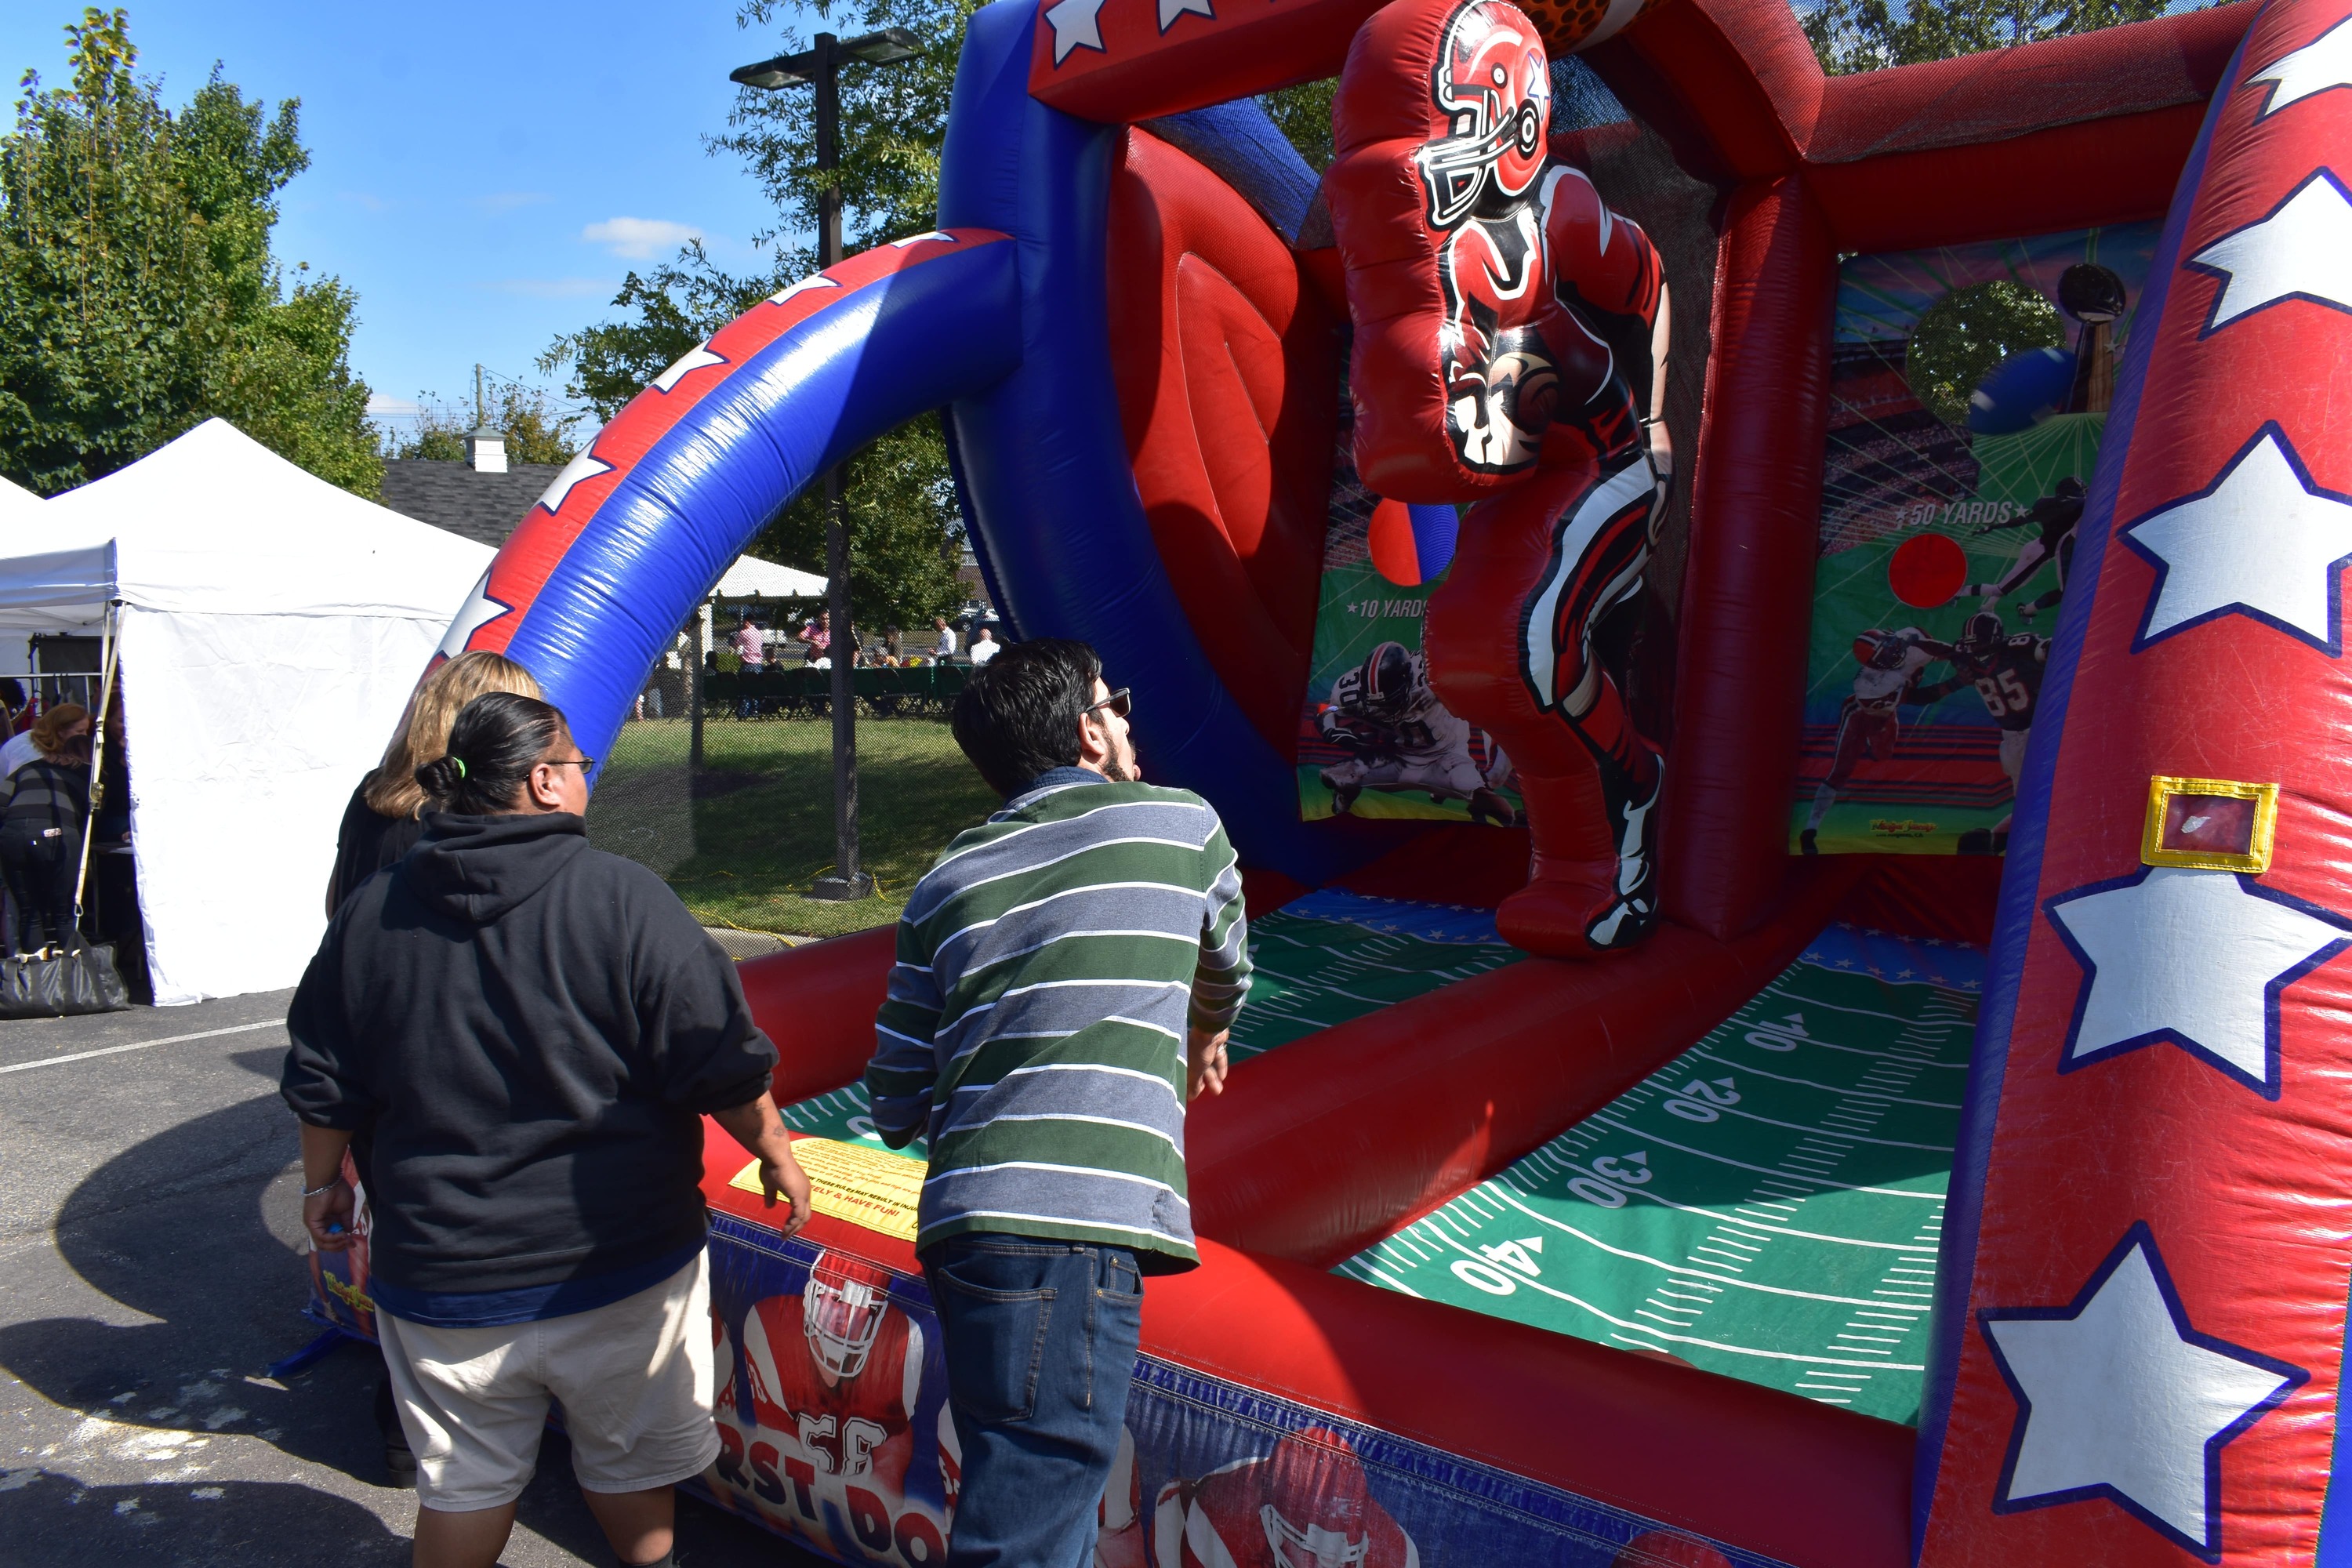 Boys playing in a football inflatable game with a scoreboard and vibrant graphics.